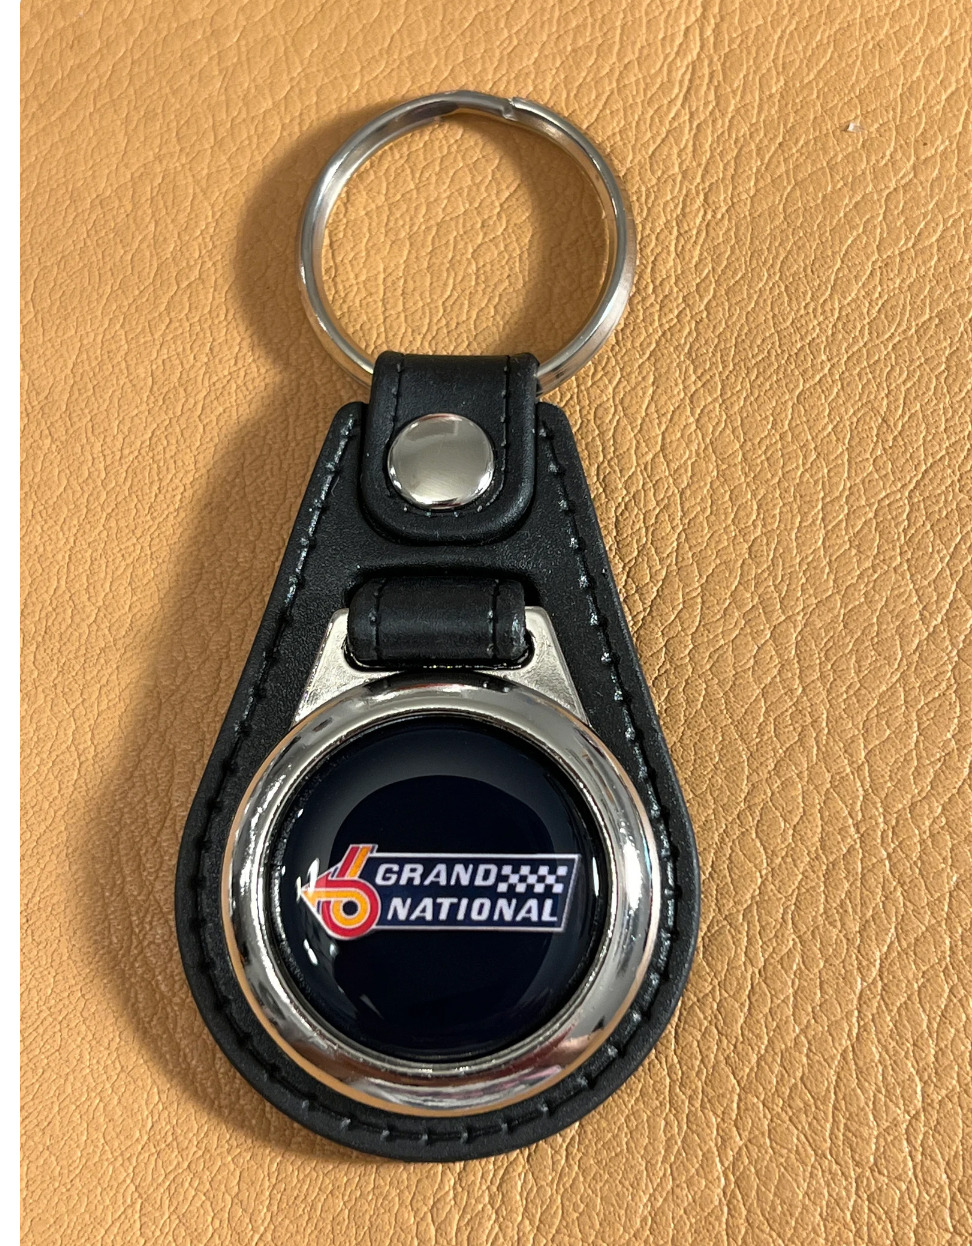 GRAND NATIONAL KEYCHAIN FOB FOR BUICK